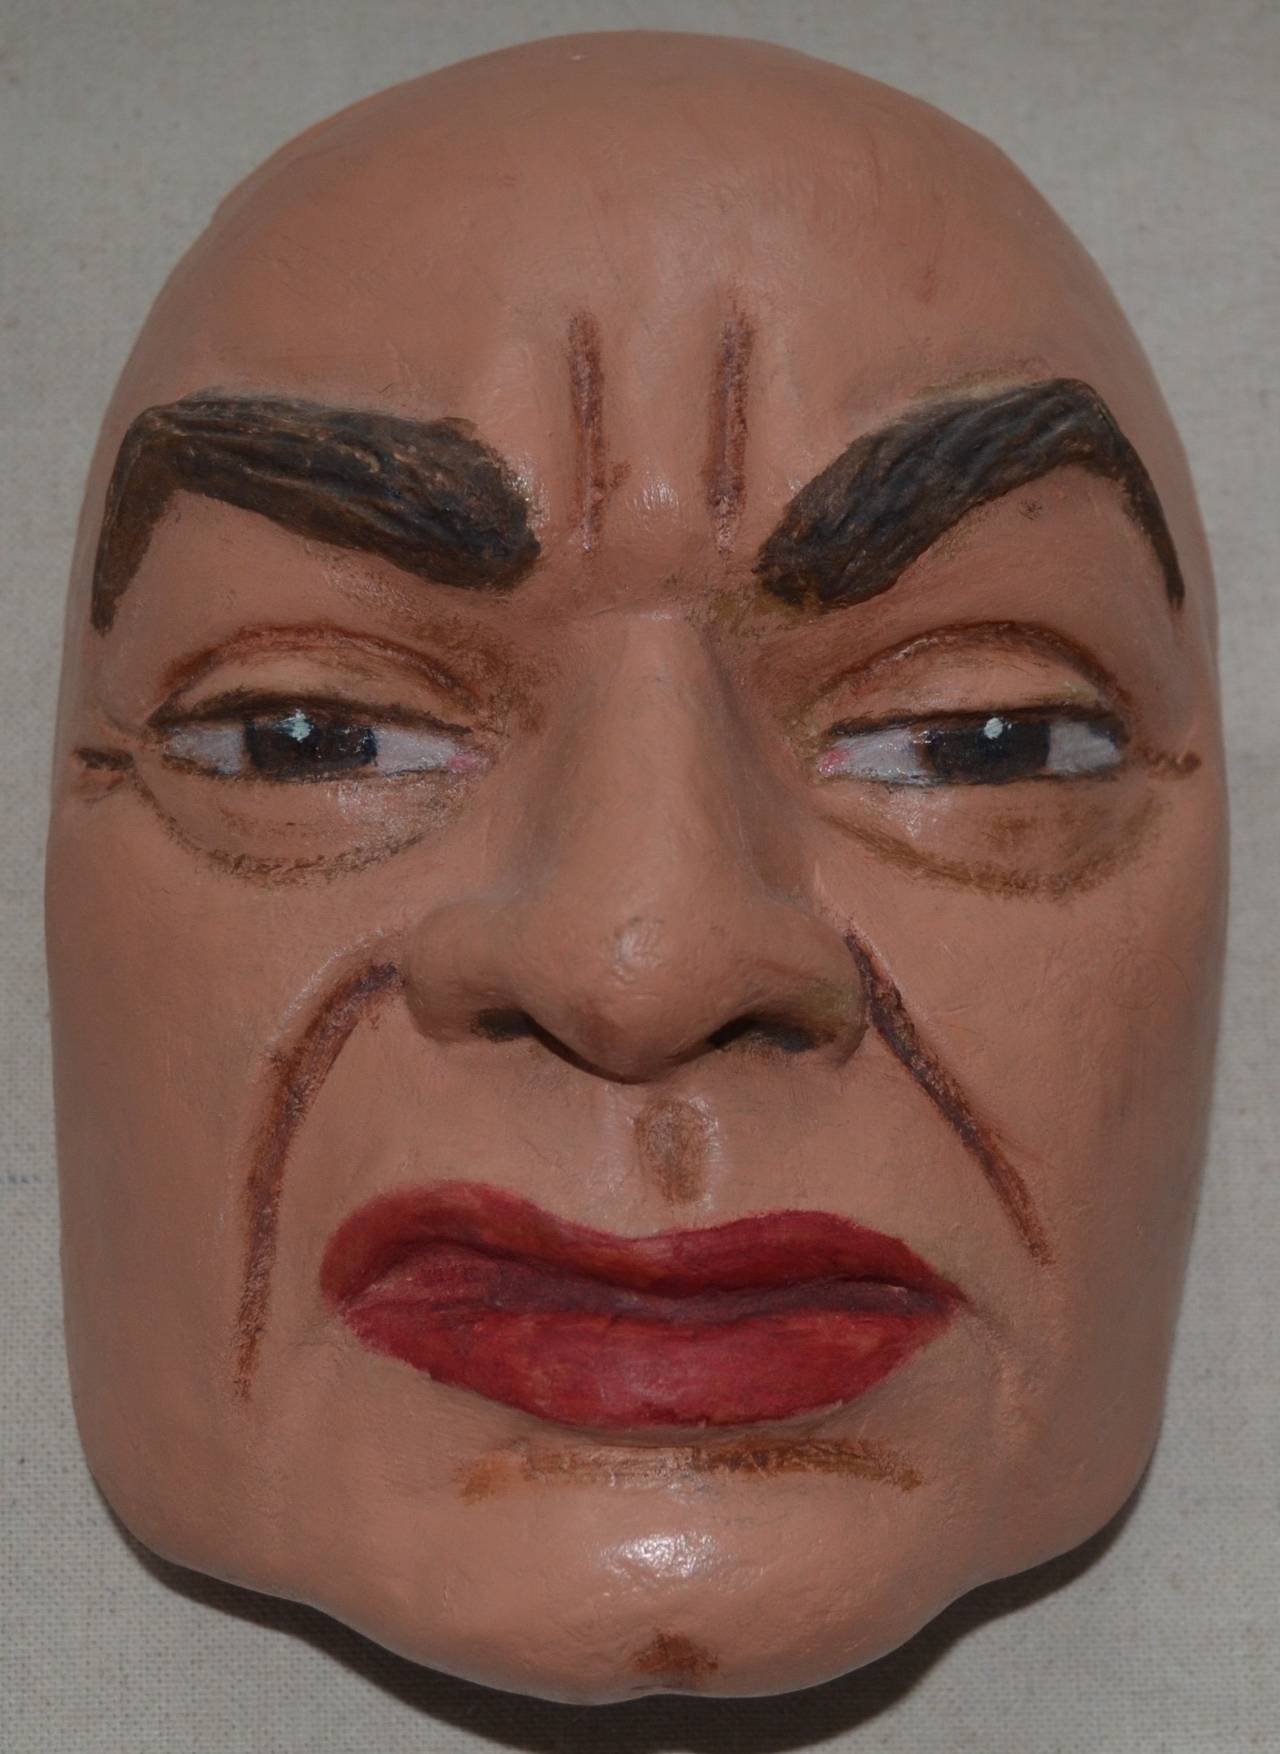 Papier mâché portrait mask of the gangster portraying actor Edward G. Robinson, by Violet Clark, (1903-1999), signed and dated on interior. Known as the "Woman of a Thousand Faces", Clark, of Stroudsburg, PA, created lifelike portrait